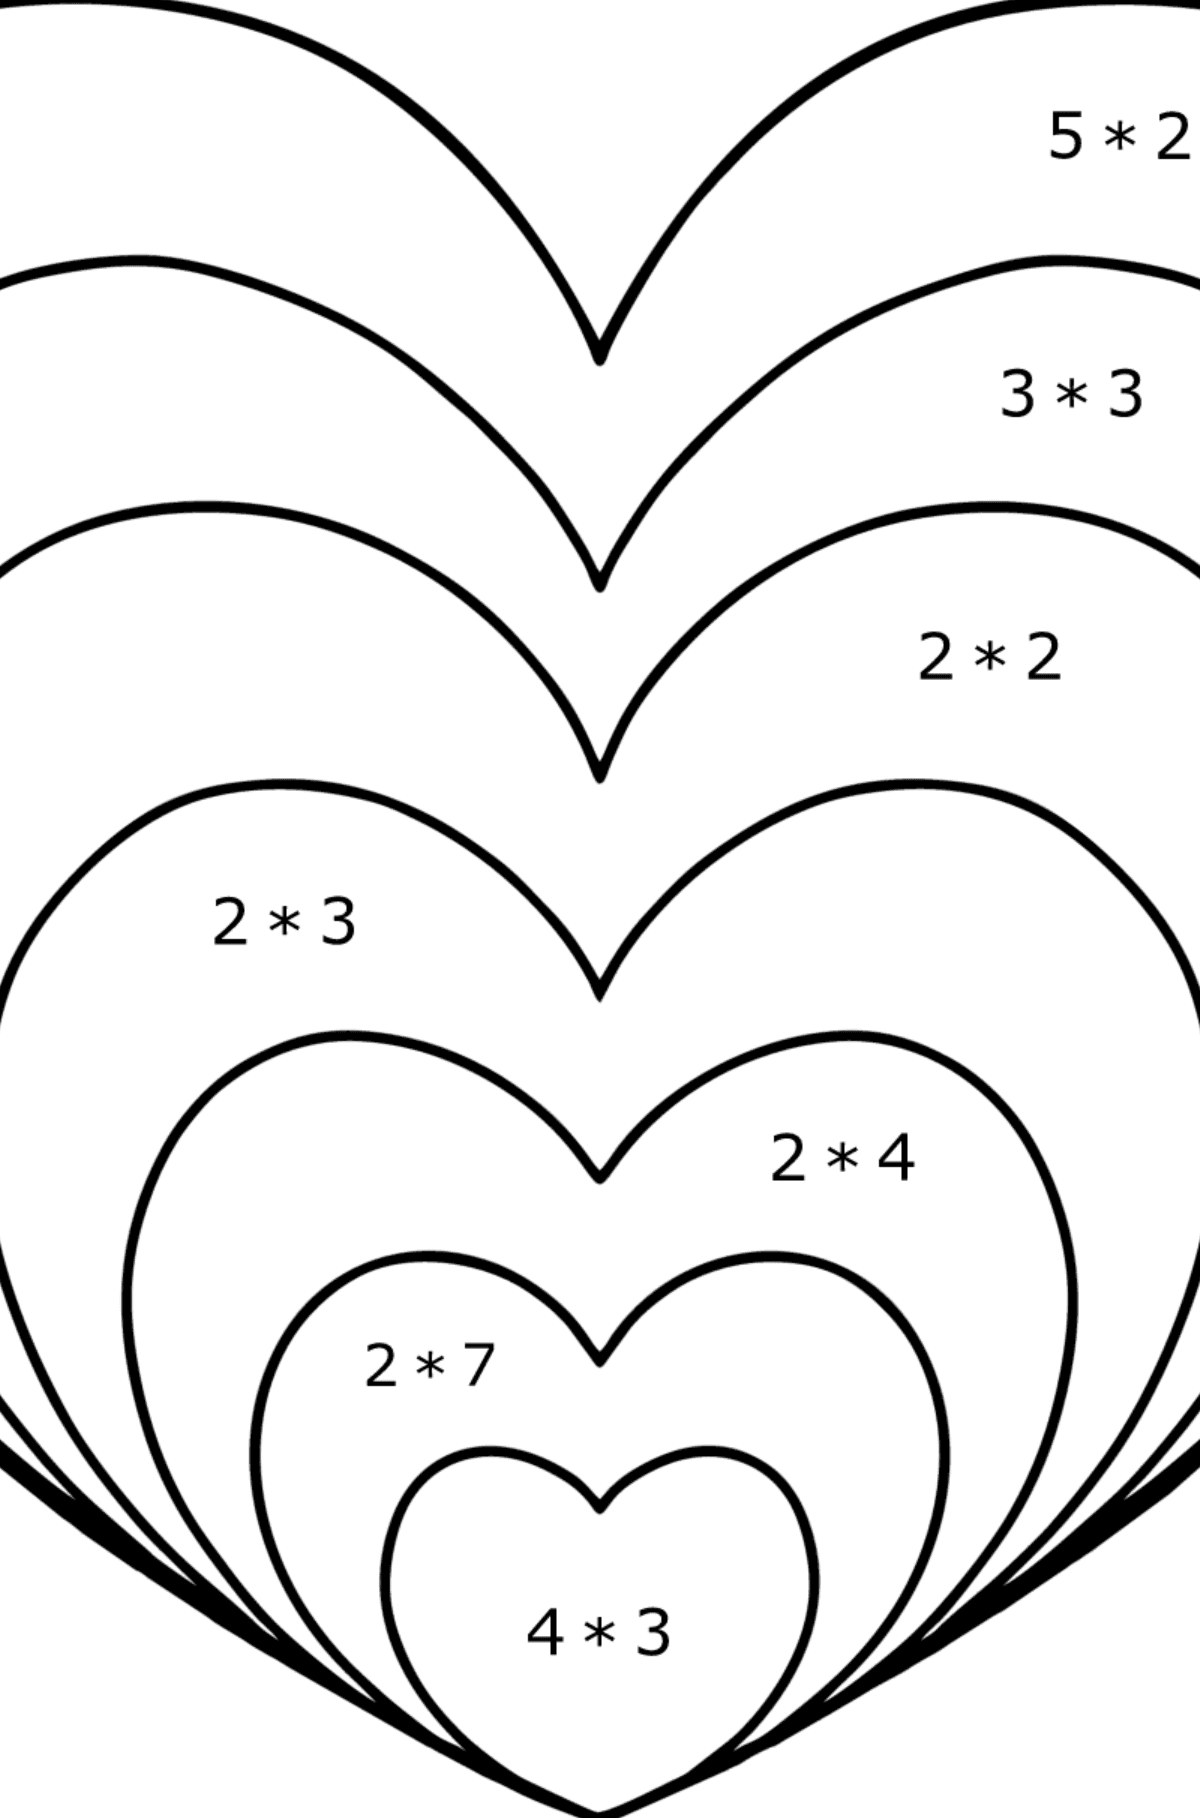 Simple Zen heart coloring page - Math Coloring - Multiplication for Kids